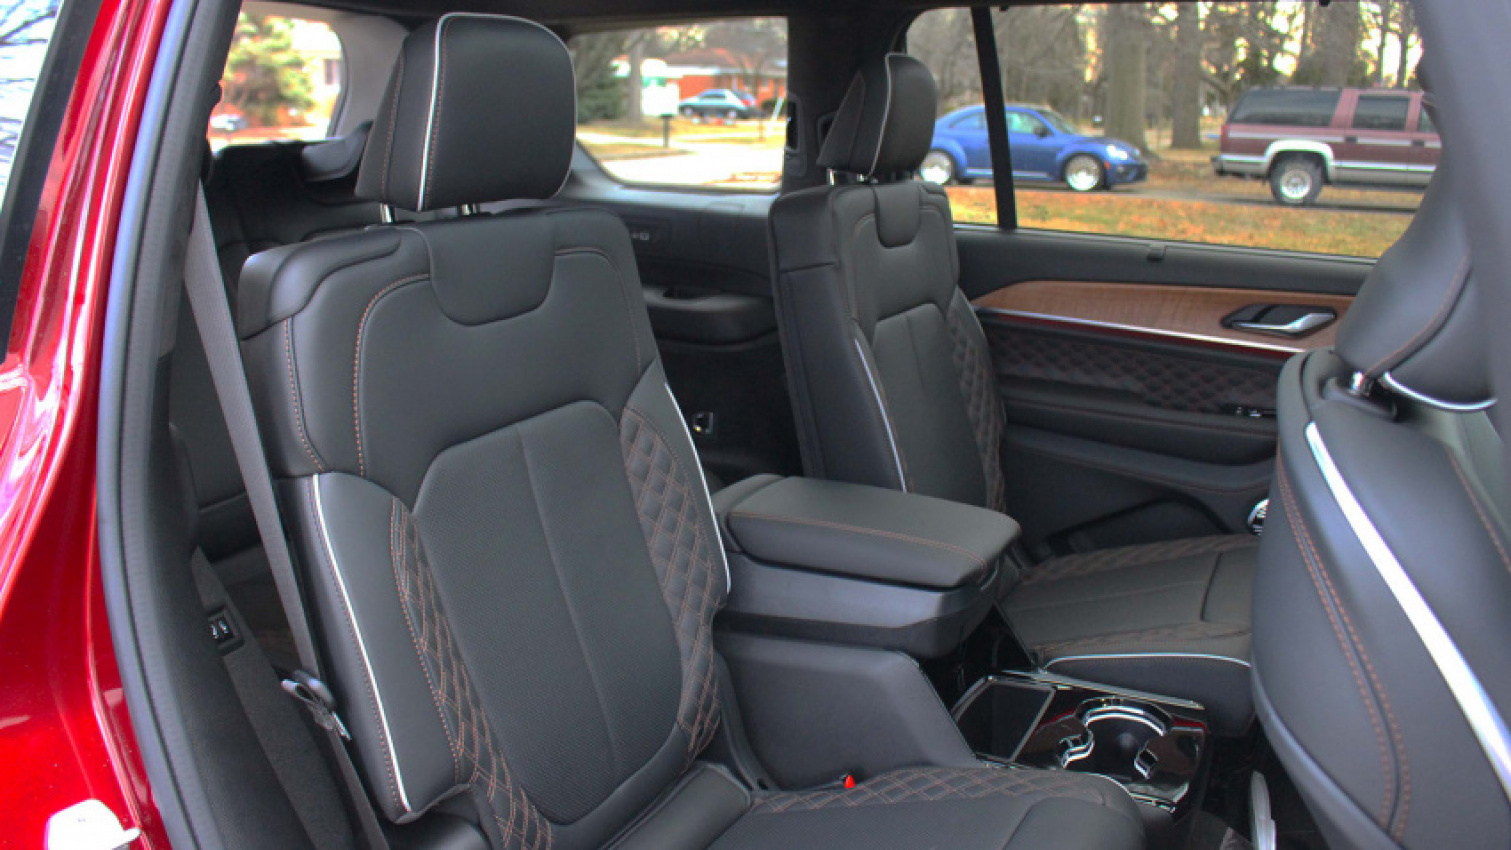 autos, cars, jeep, android, driveway tests, jeep grand cherokee, luxury, android, 2022 jeep grand cherokee l summit interior review | jeep is a real luxury brand now